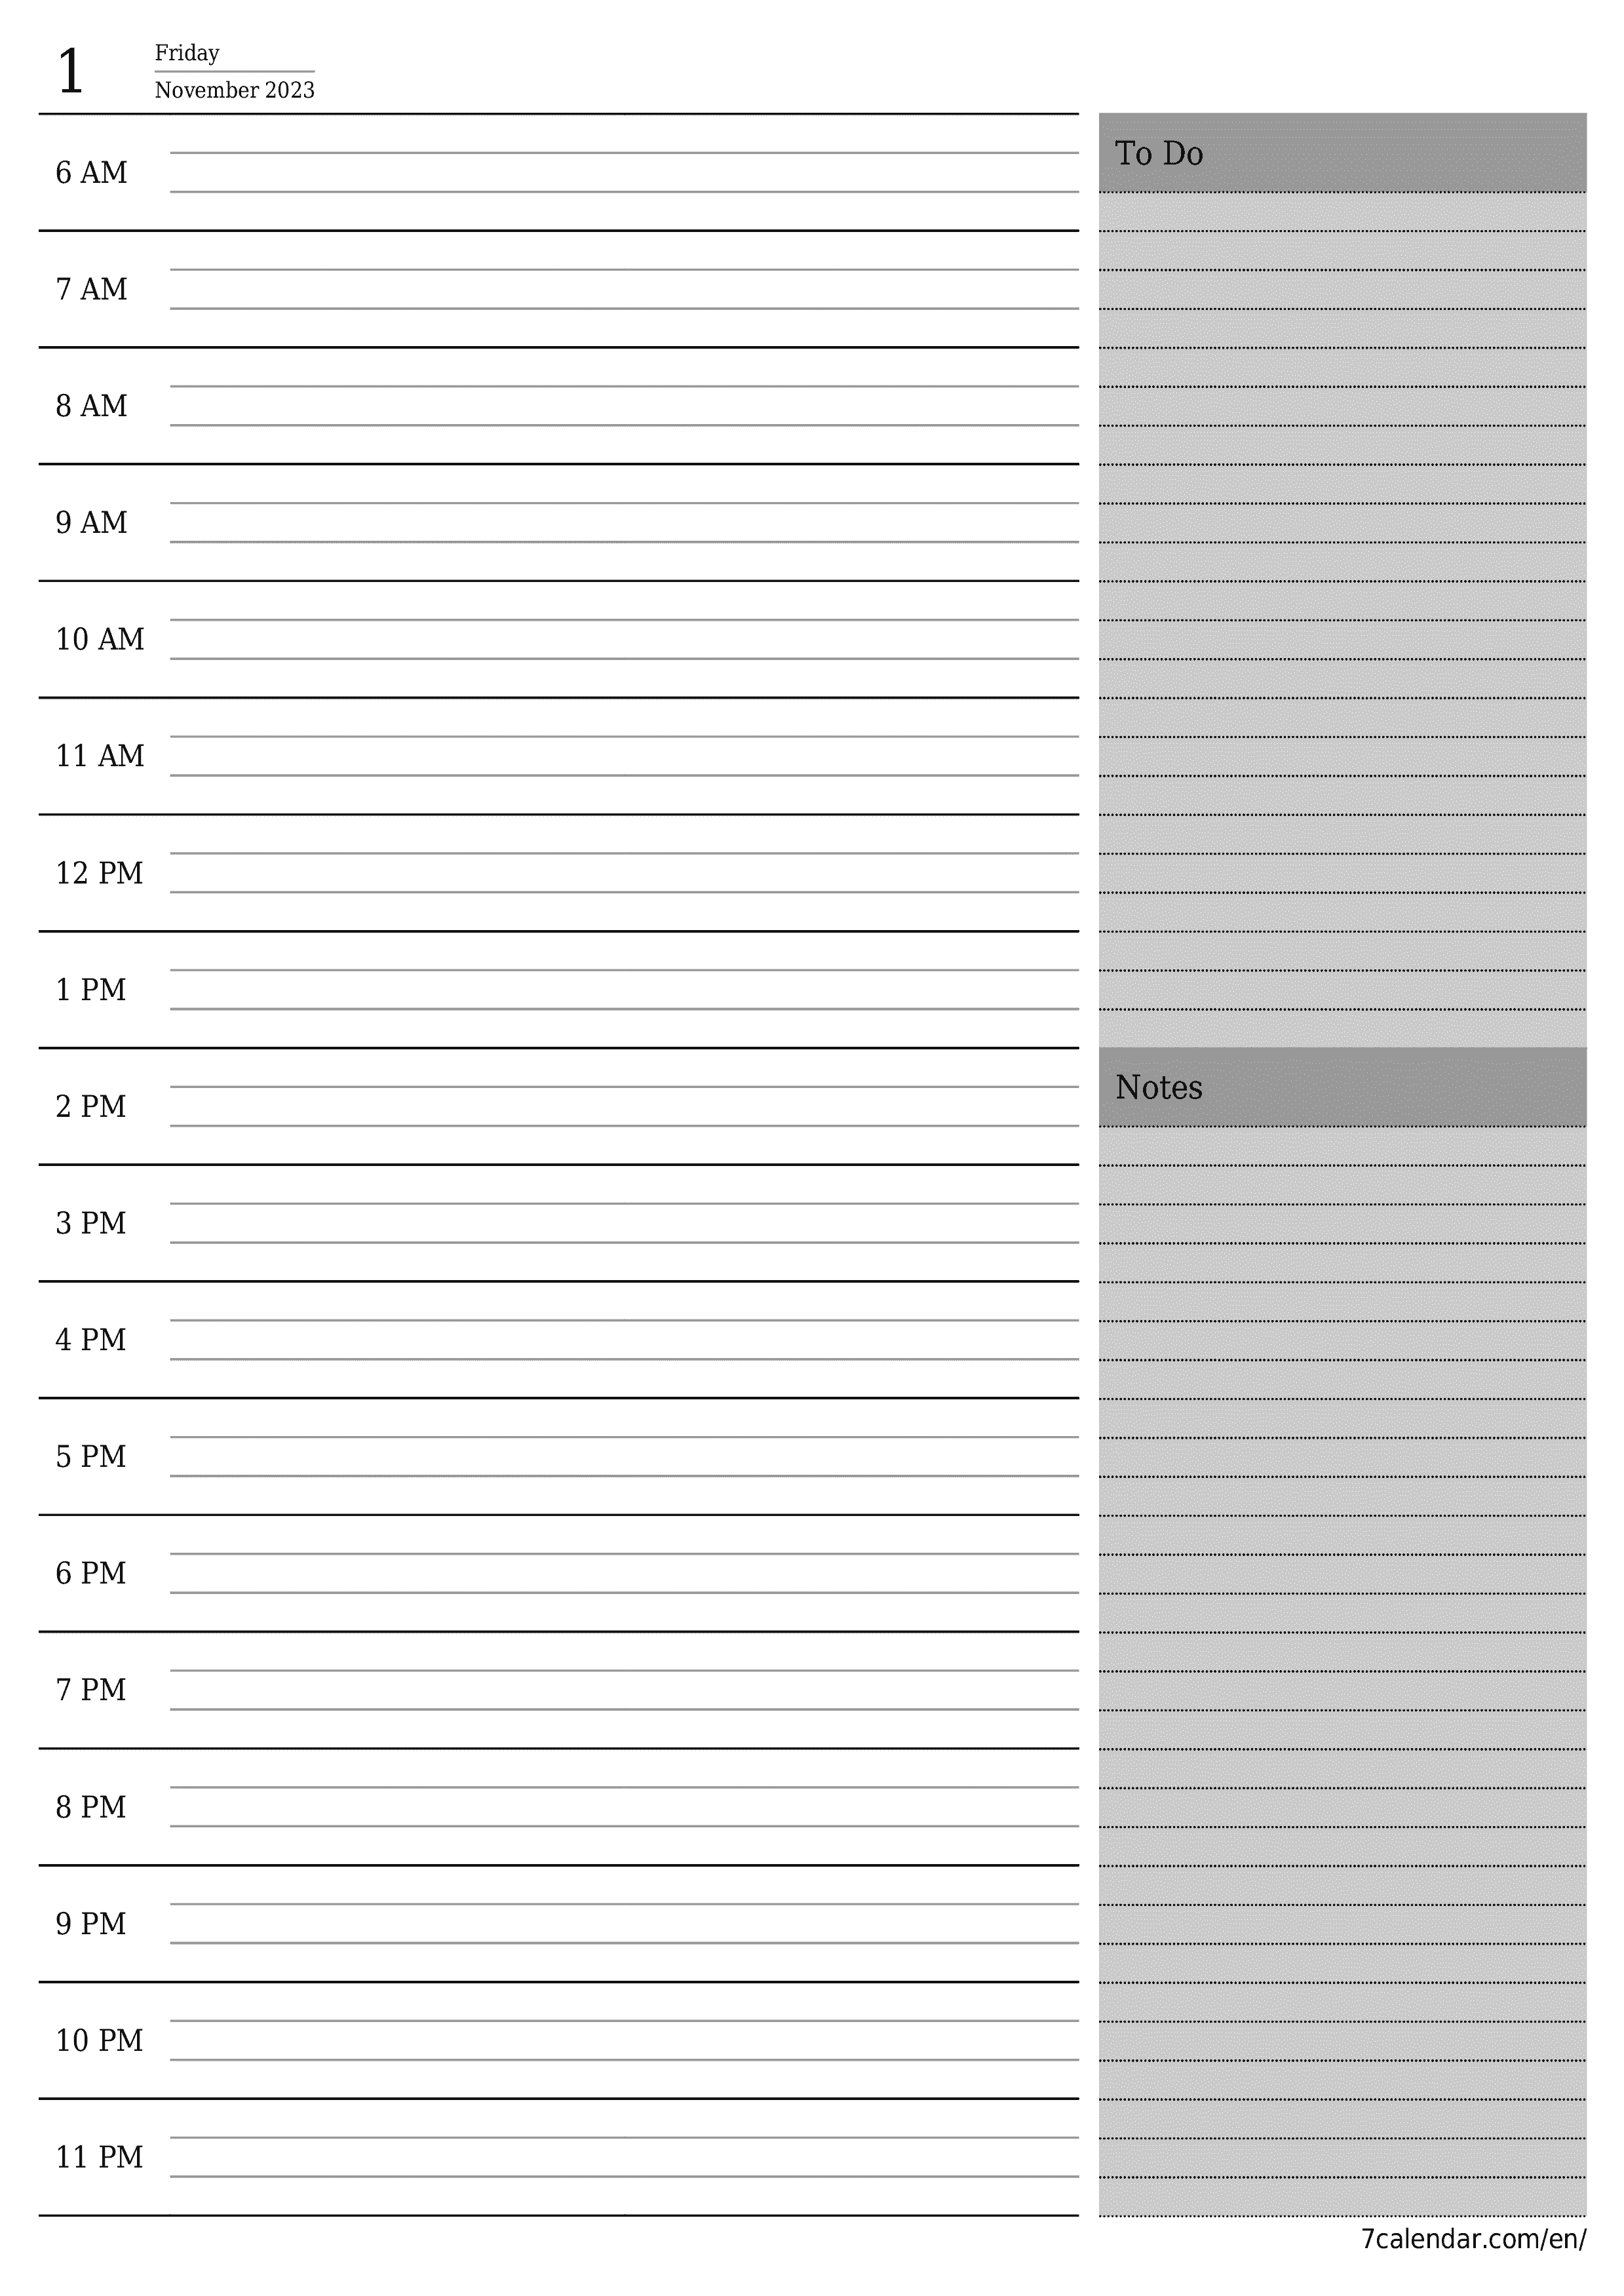 Blank daily printable calendar and planner for day November 2023 with notes, save and print to PDF PNG English